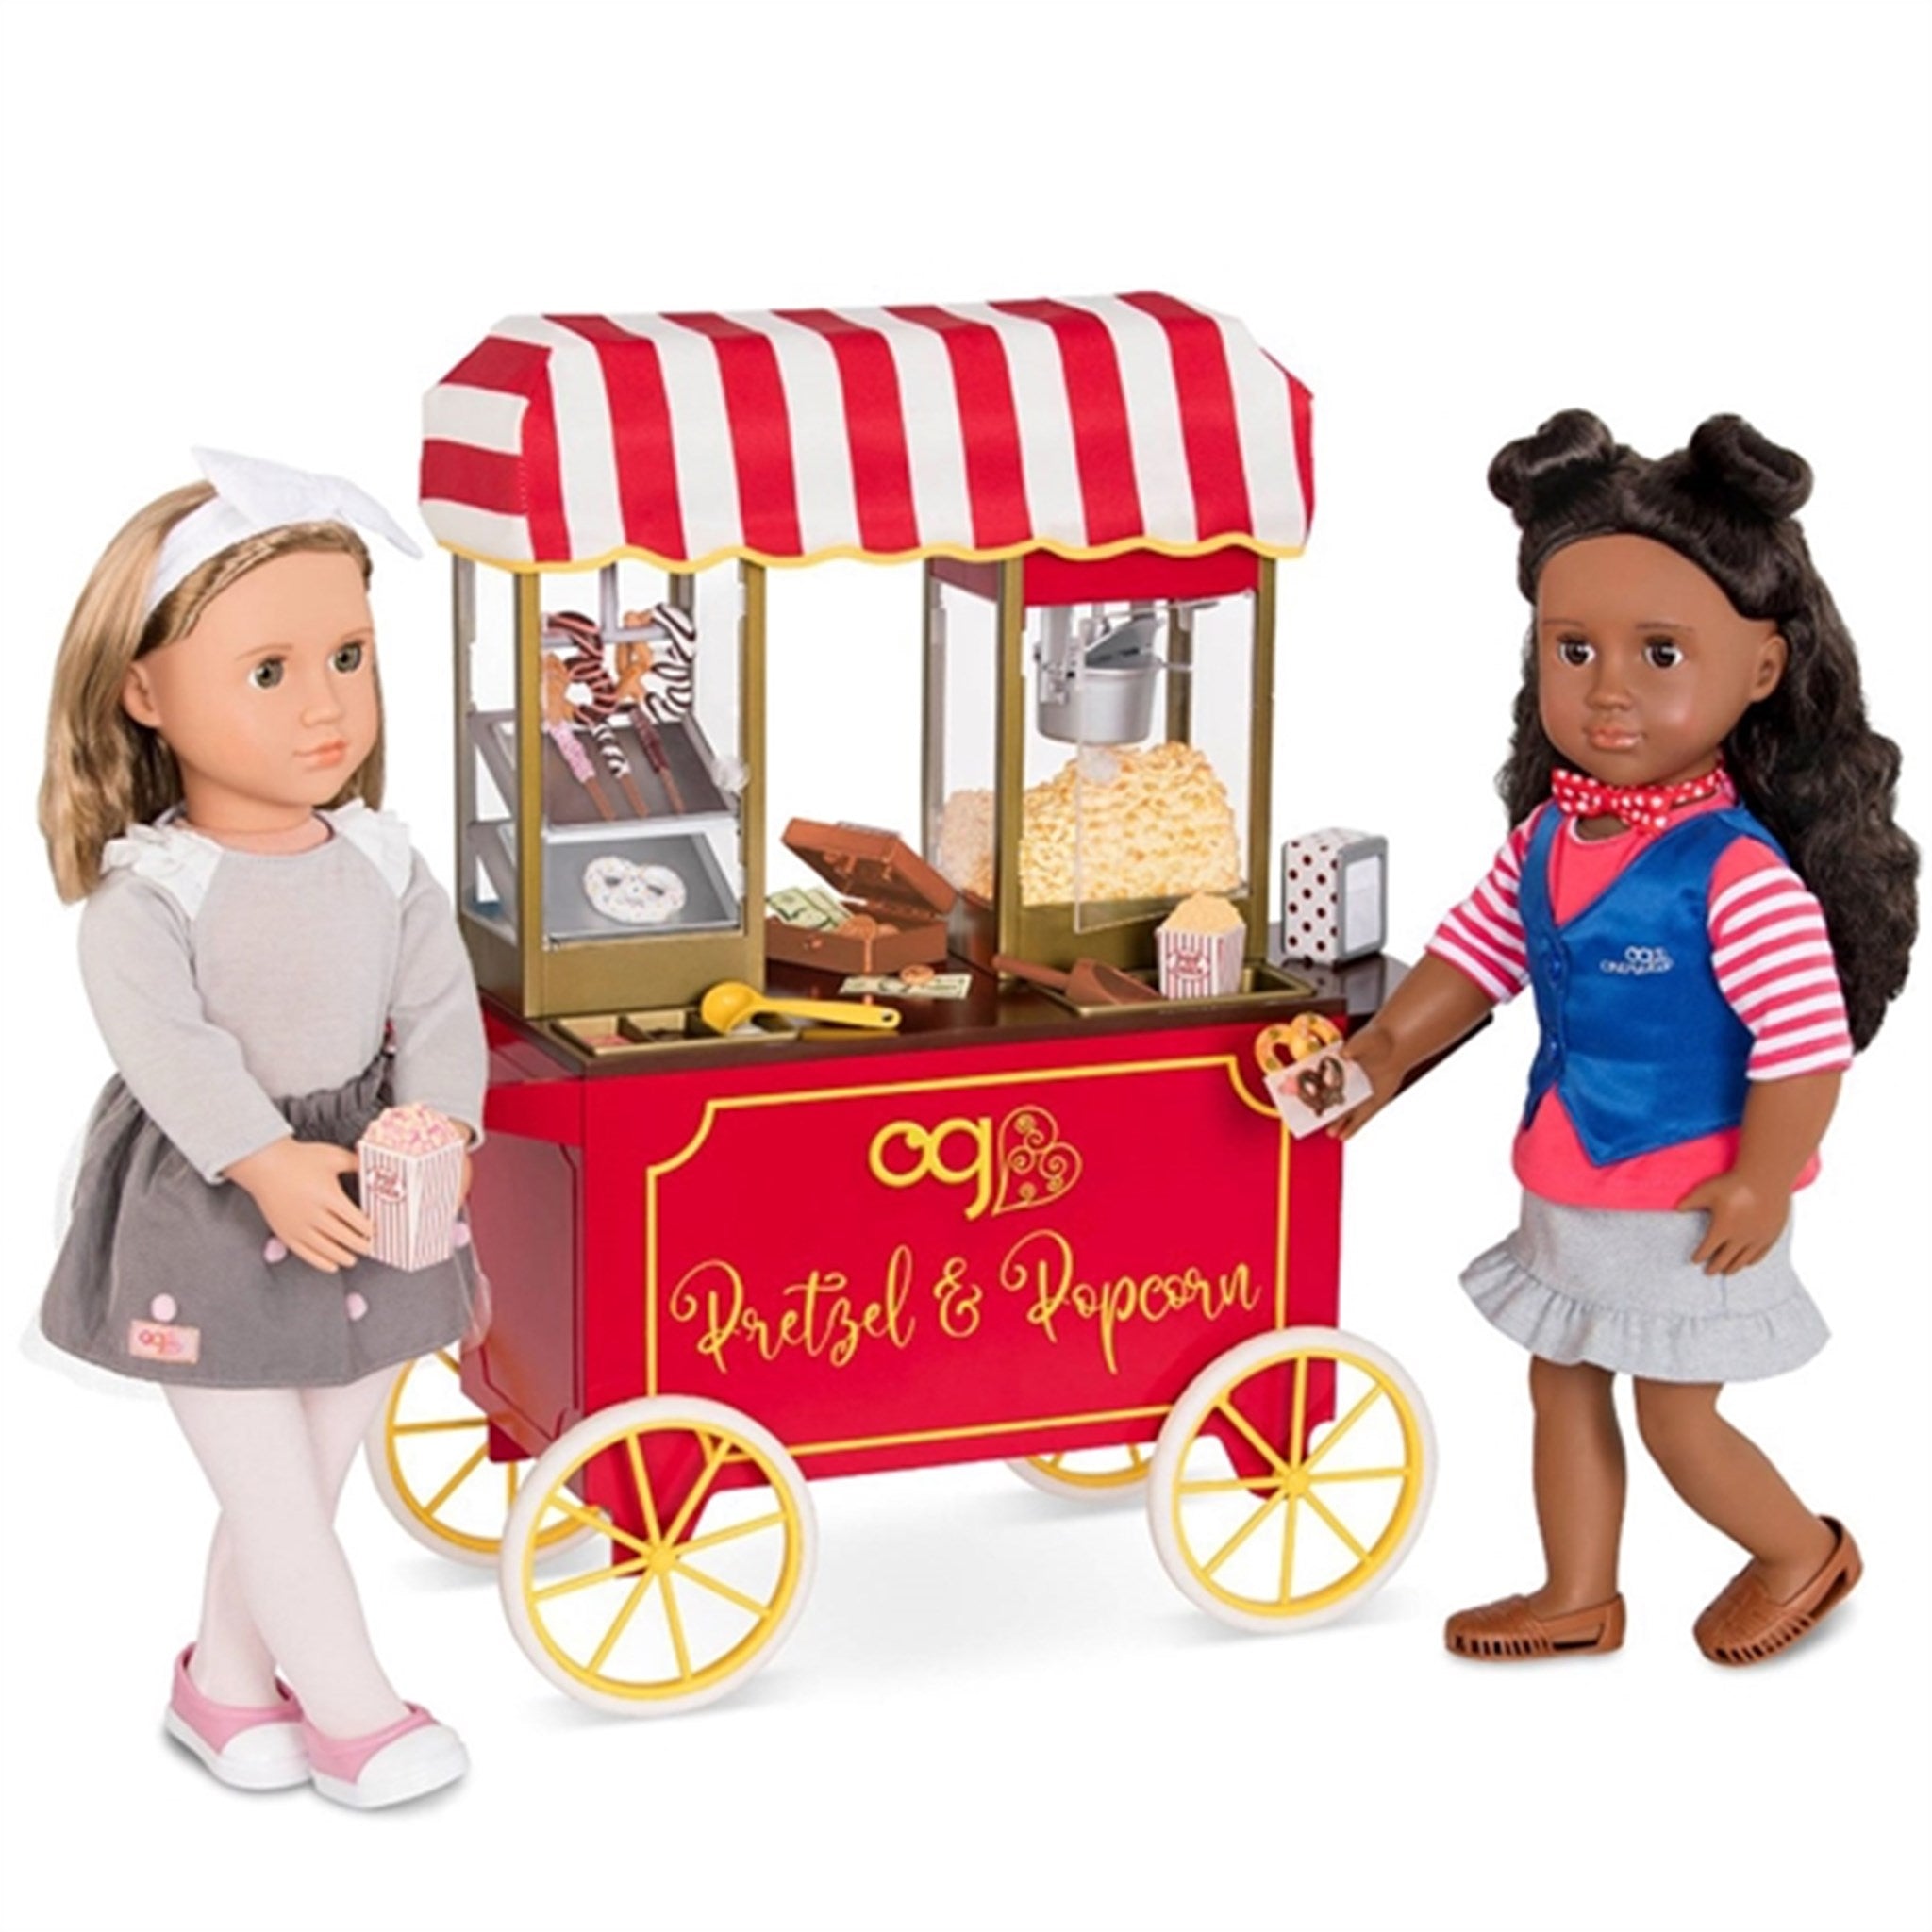 Our Generation Pastry and Popcorn Truck 2